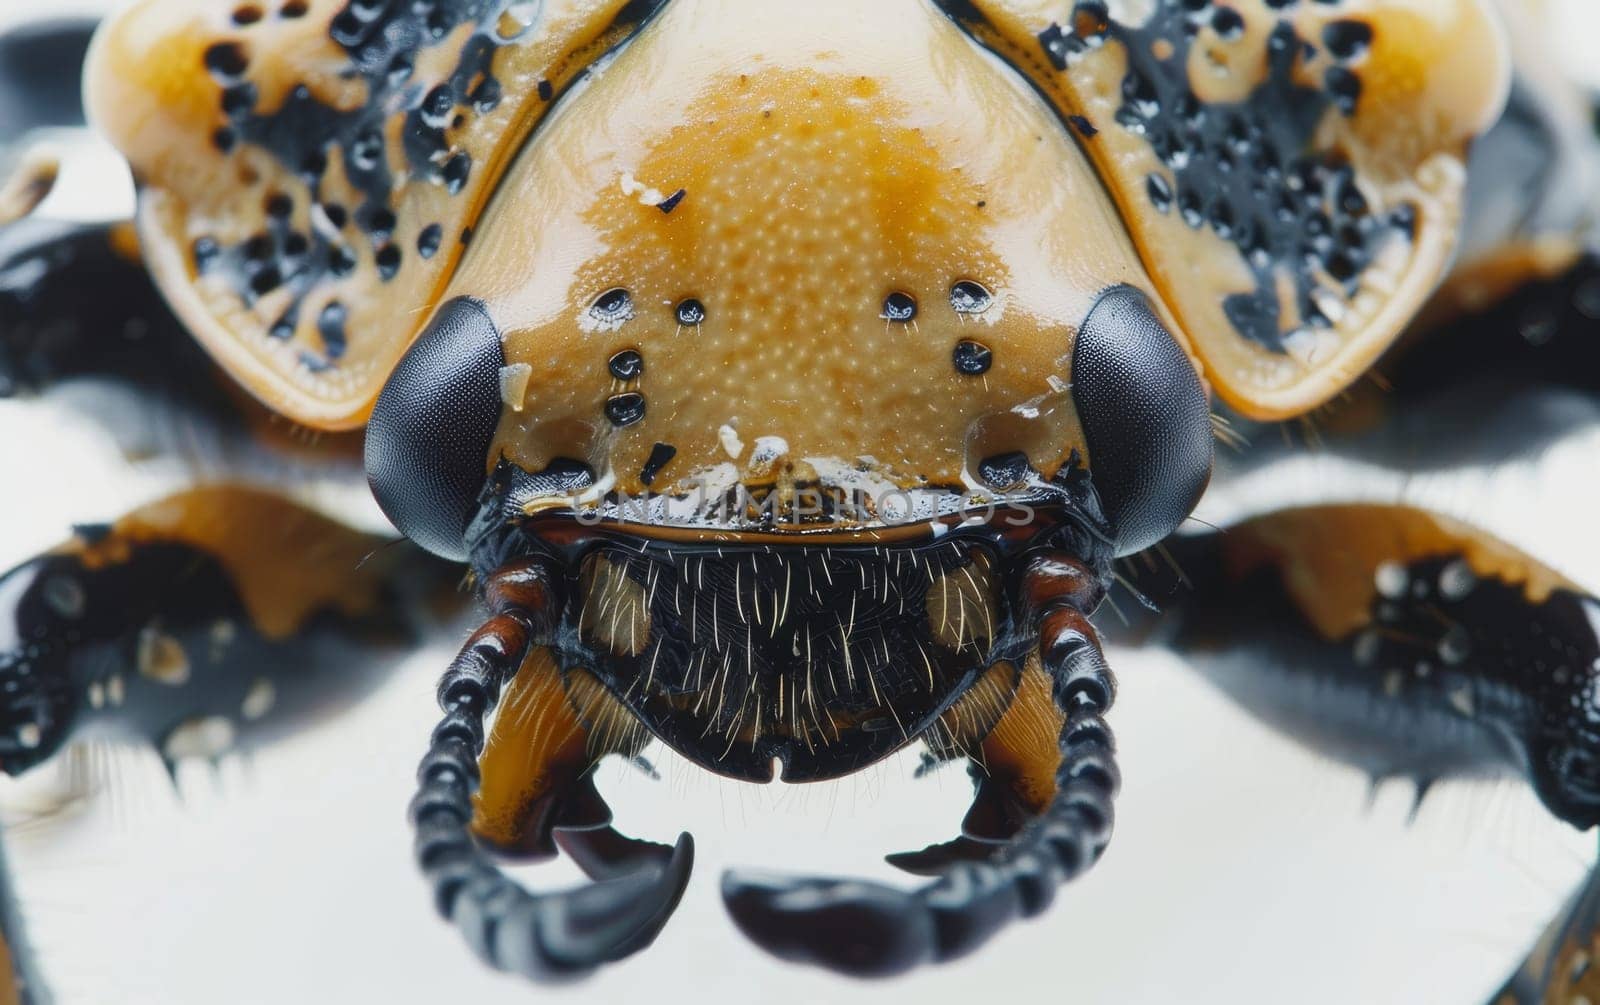 This macro image exhibits a Goliath beetle's pincers, highlighting the impressive mechanics and formidable appearance of its front claws. The design reflects evolutionary perfection.